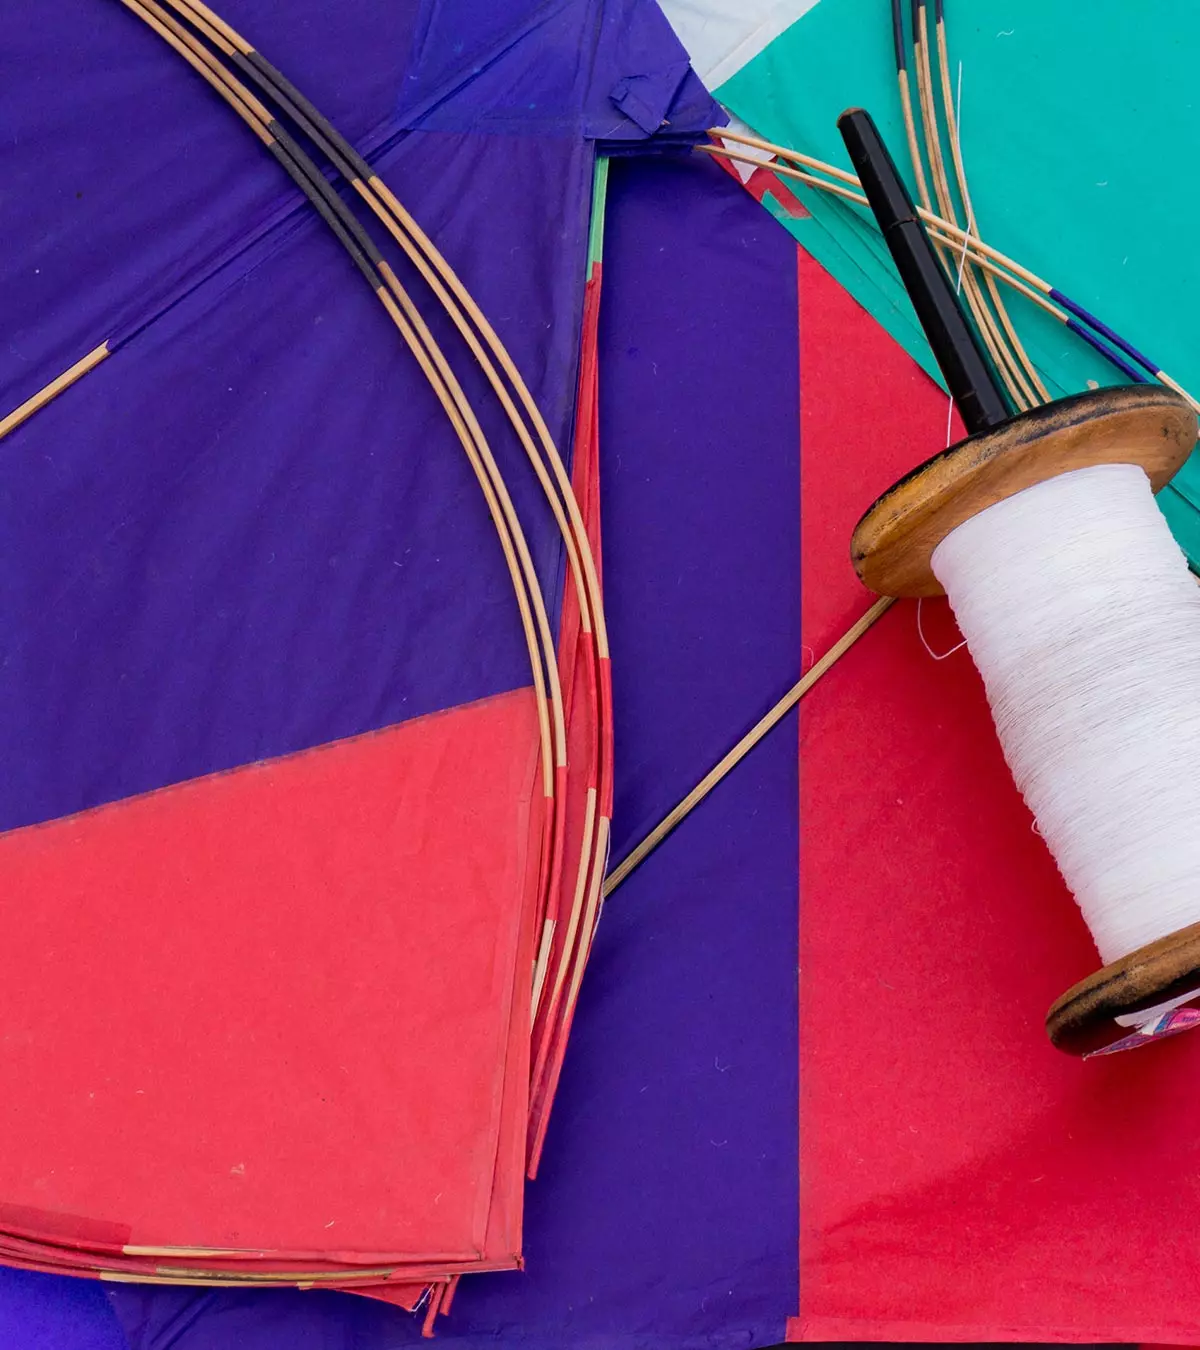 11 Easy Ideas To Make A Kite For Kids, With Paper And Sticks